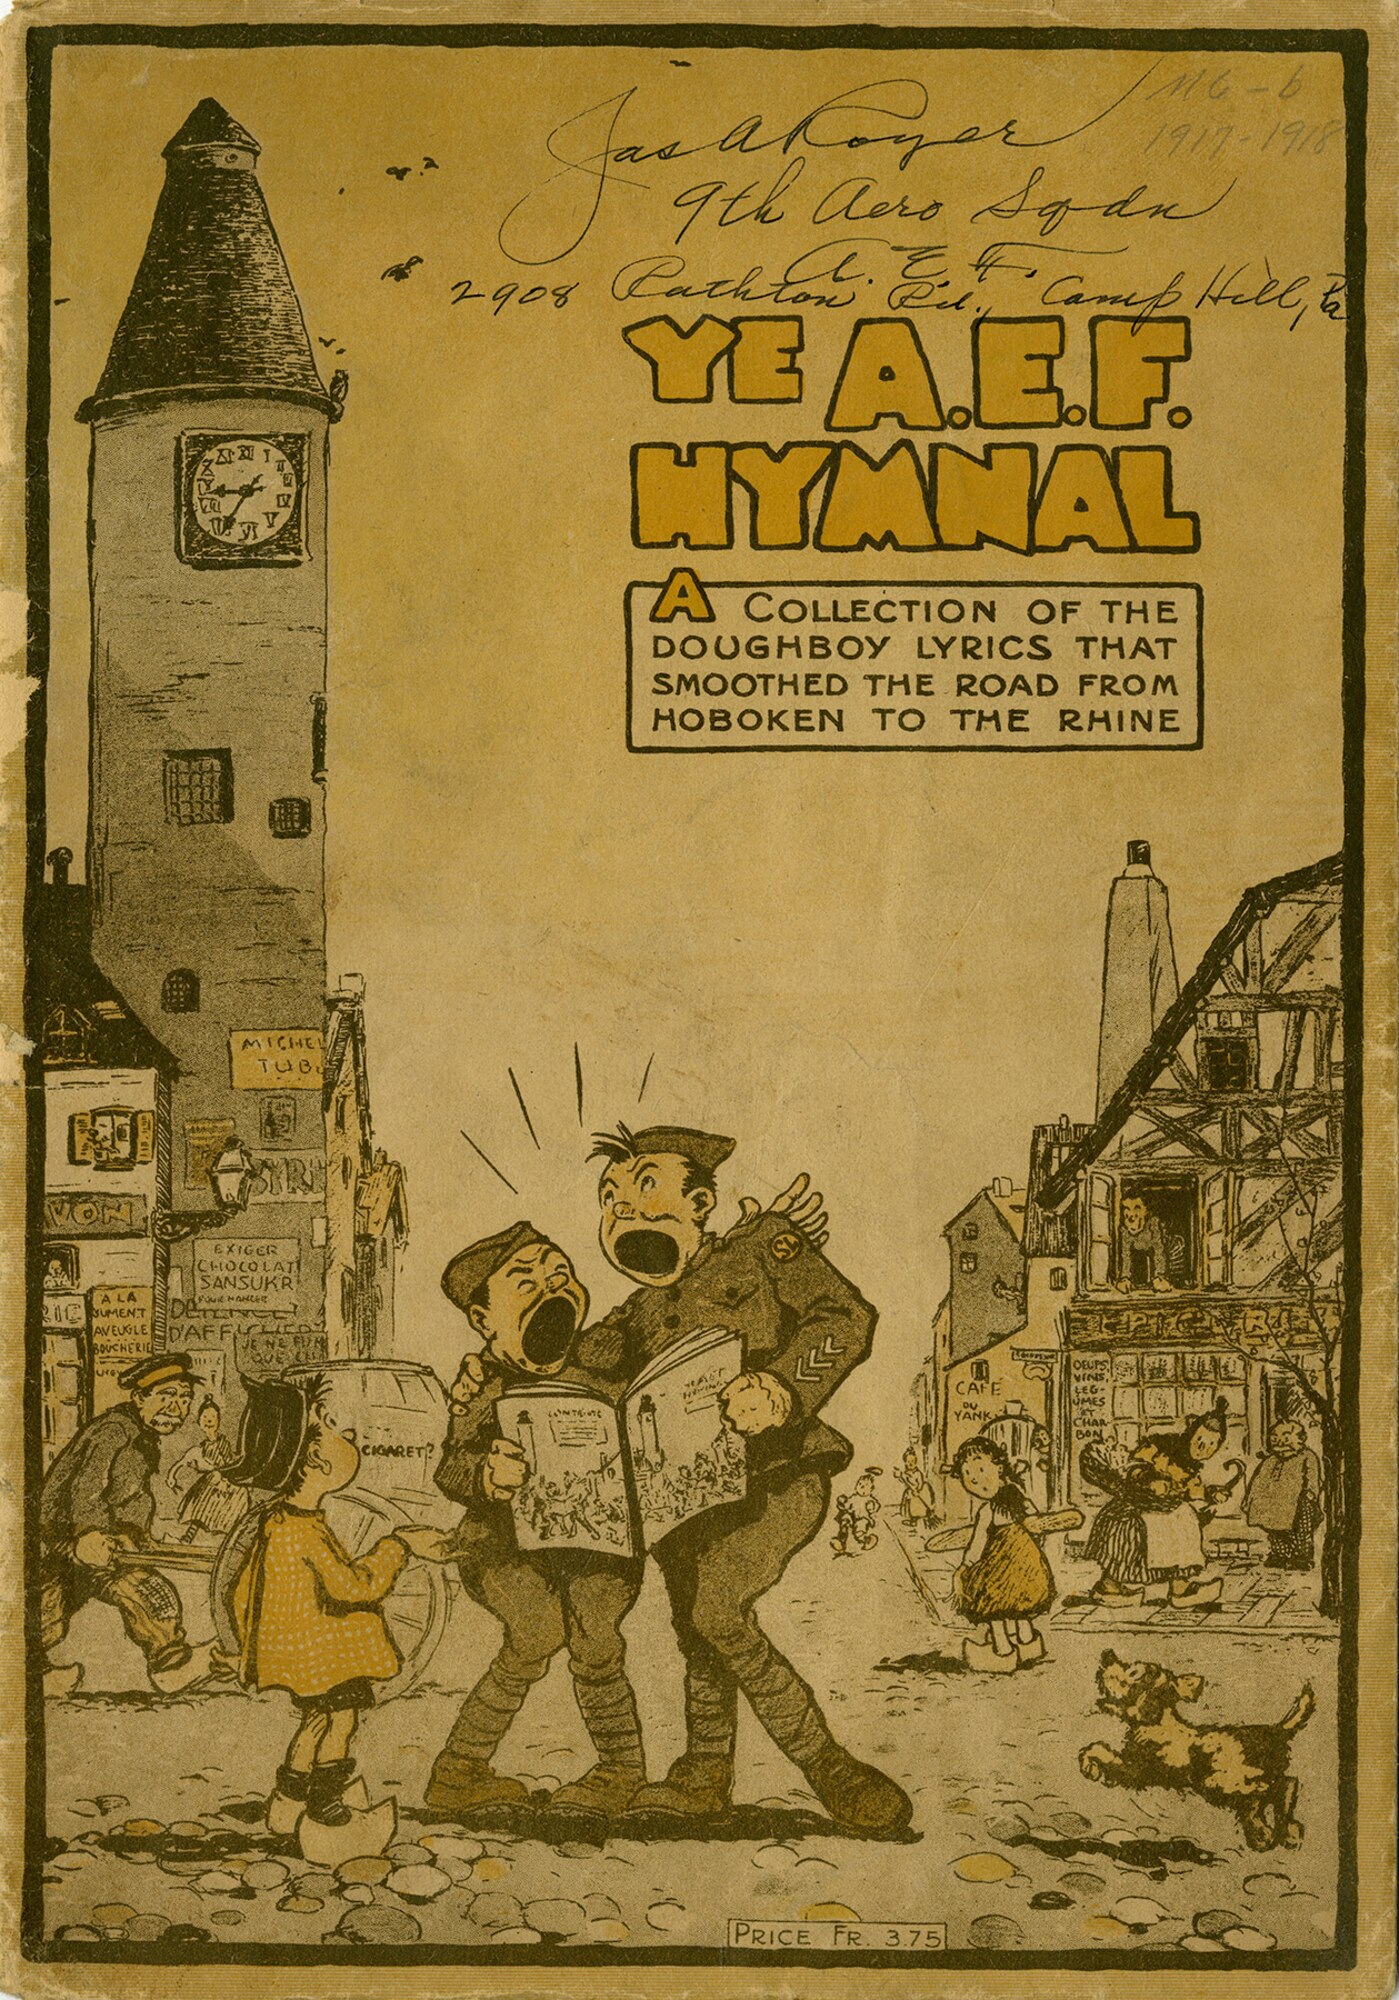 This short booklet, "Ye A.E.F Hymnal: A Collection of the Doughboy Lyrics that Smoothed the Road from Hoboken to the Rhine," contains 17 humorous songs collected from the Front. It was published in Nancy, France, in 1918-1919 by Berger-Levrault and originally sold for 3.75 francs. The booklet was purchased and returned home by Lt. James A. Royer of the 9th Aero Squadron. (U.S. Air Force photo)